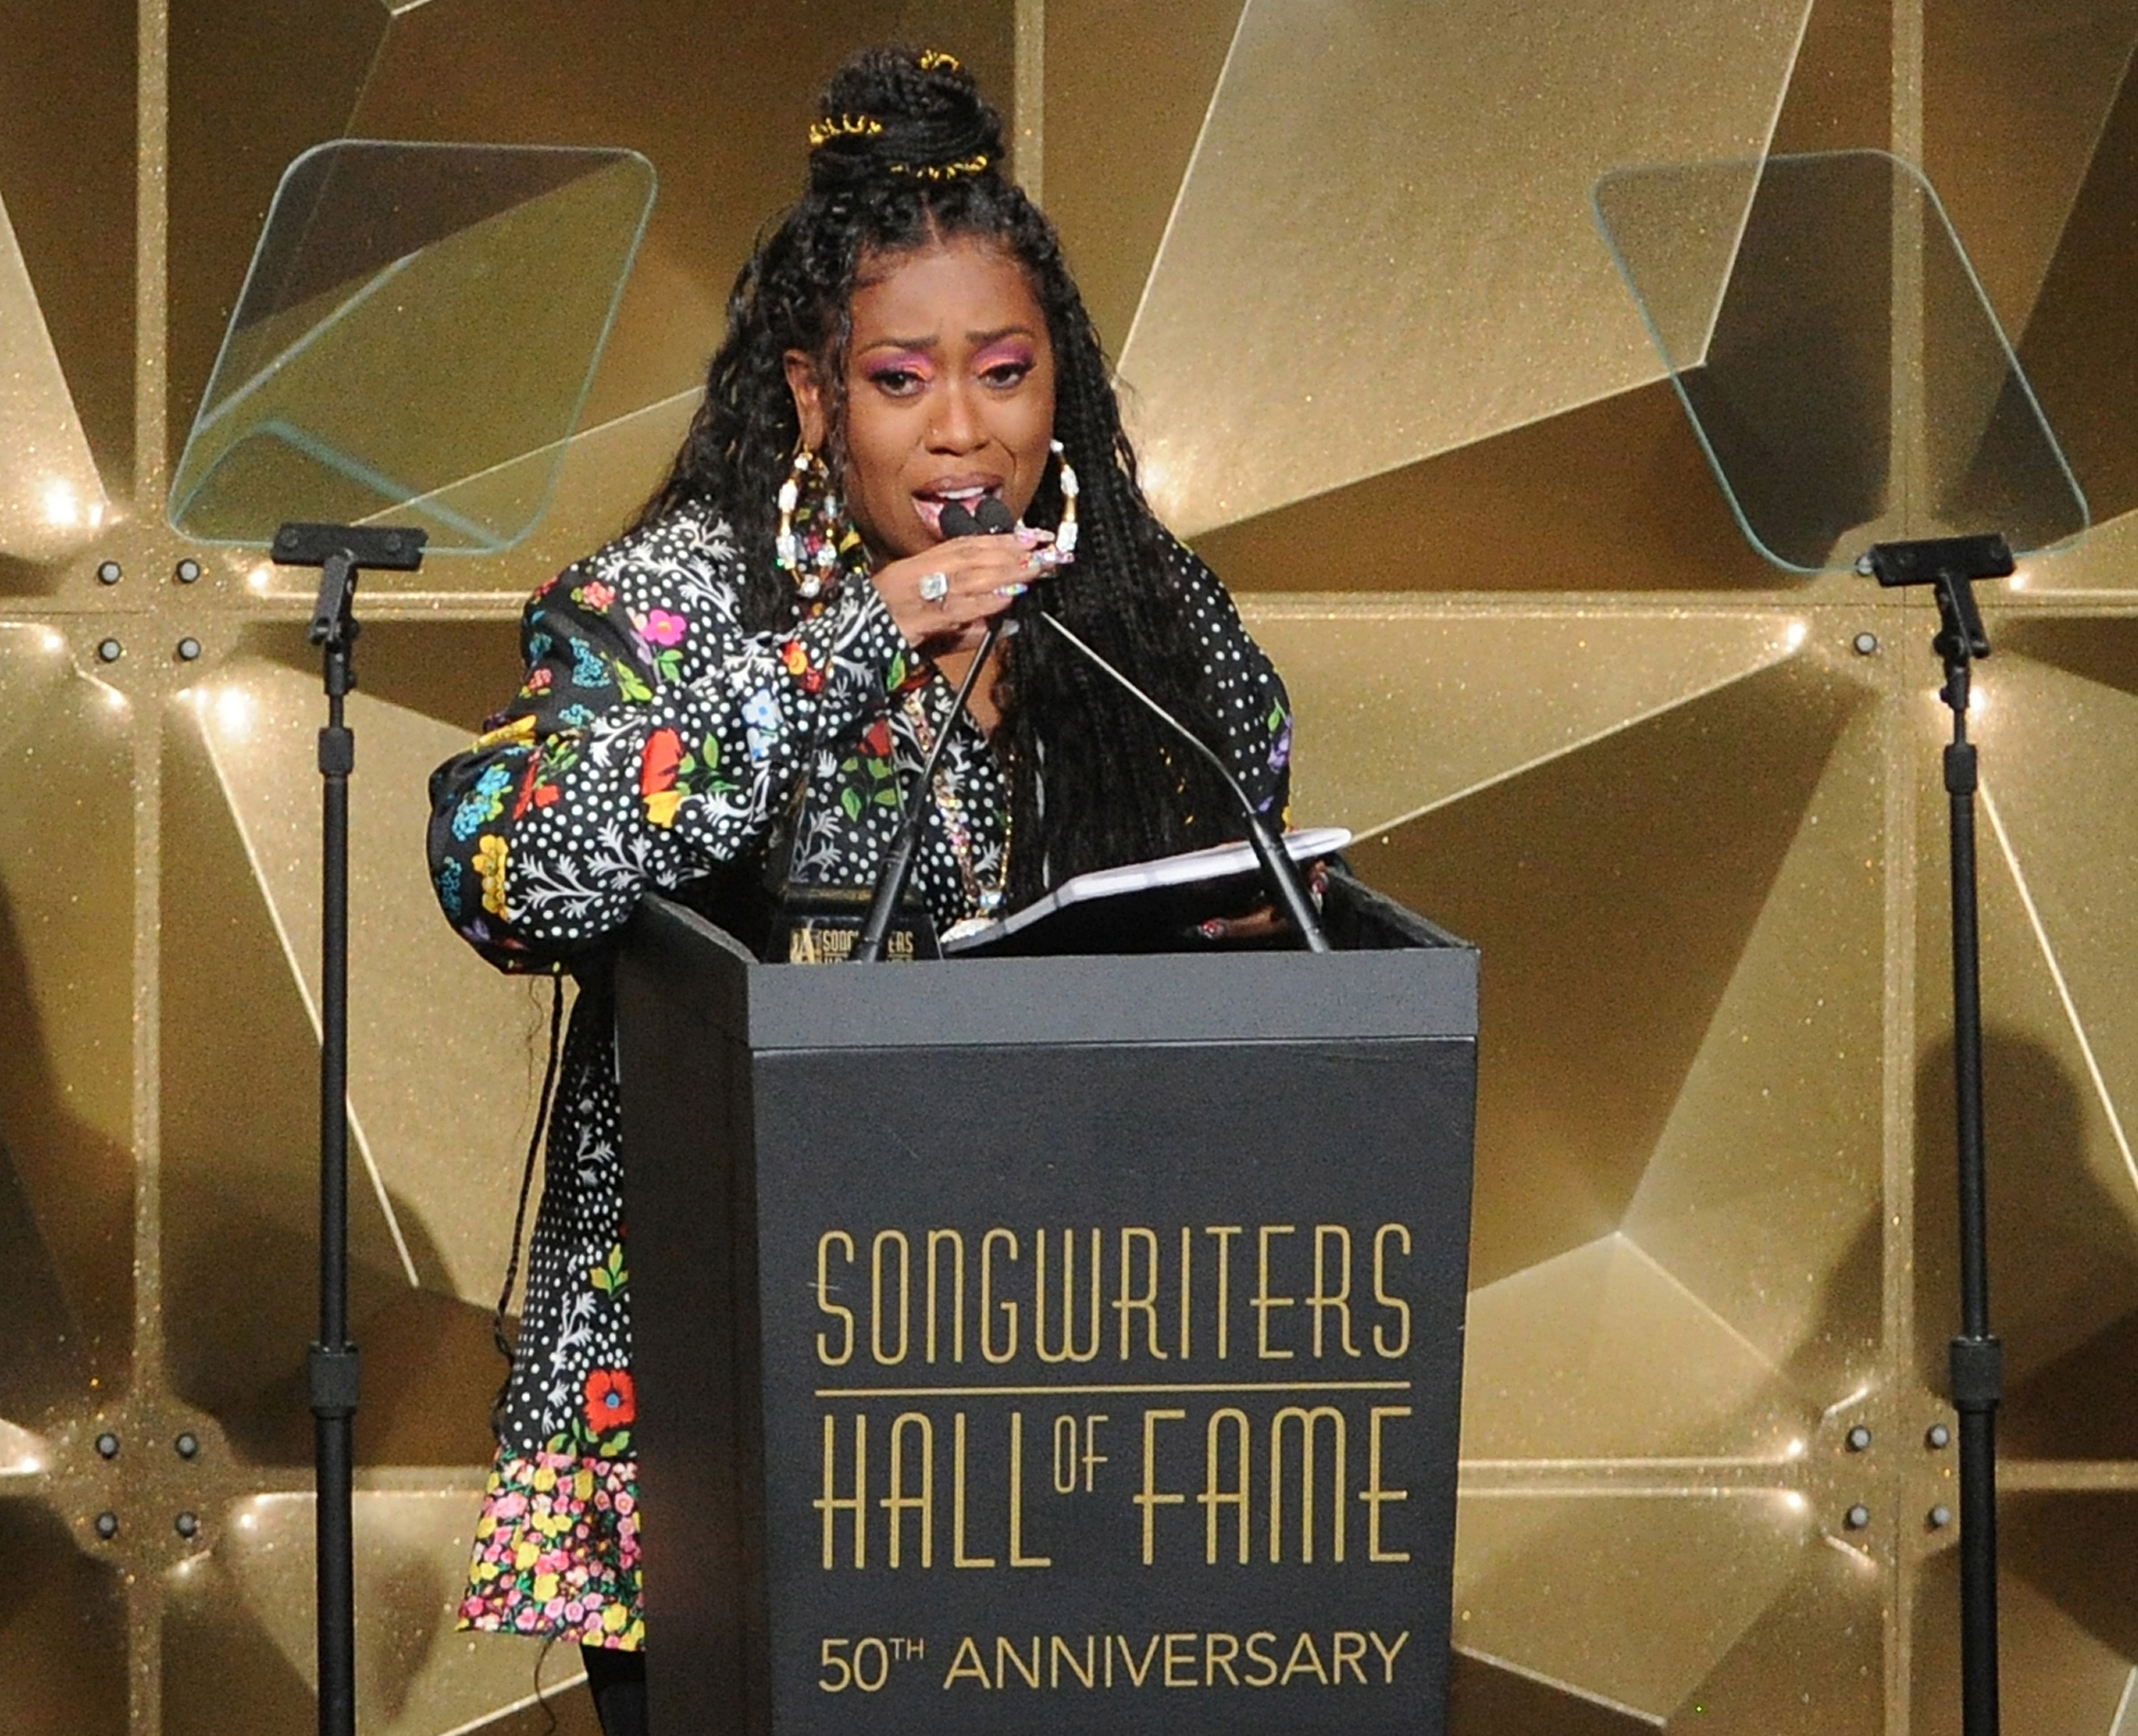 Missy Elliott, in tears, gets inducted into Songwriters Hall